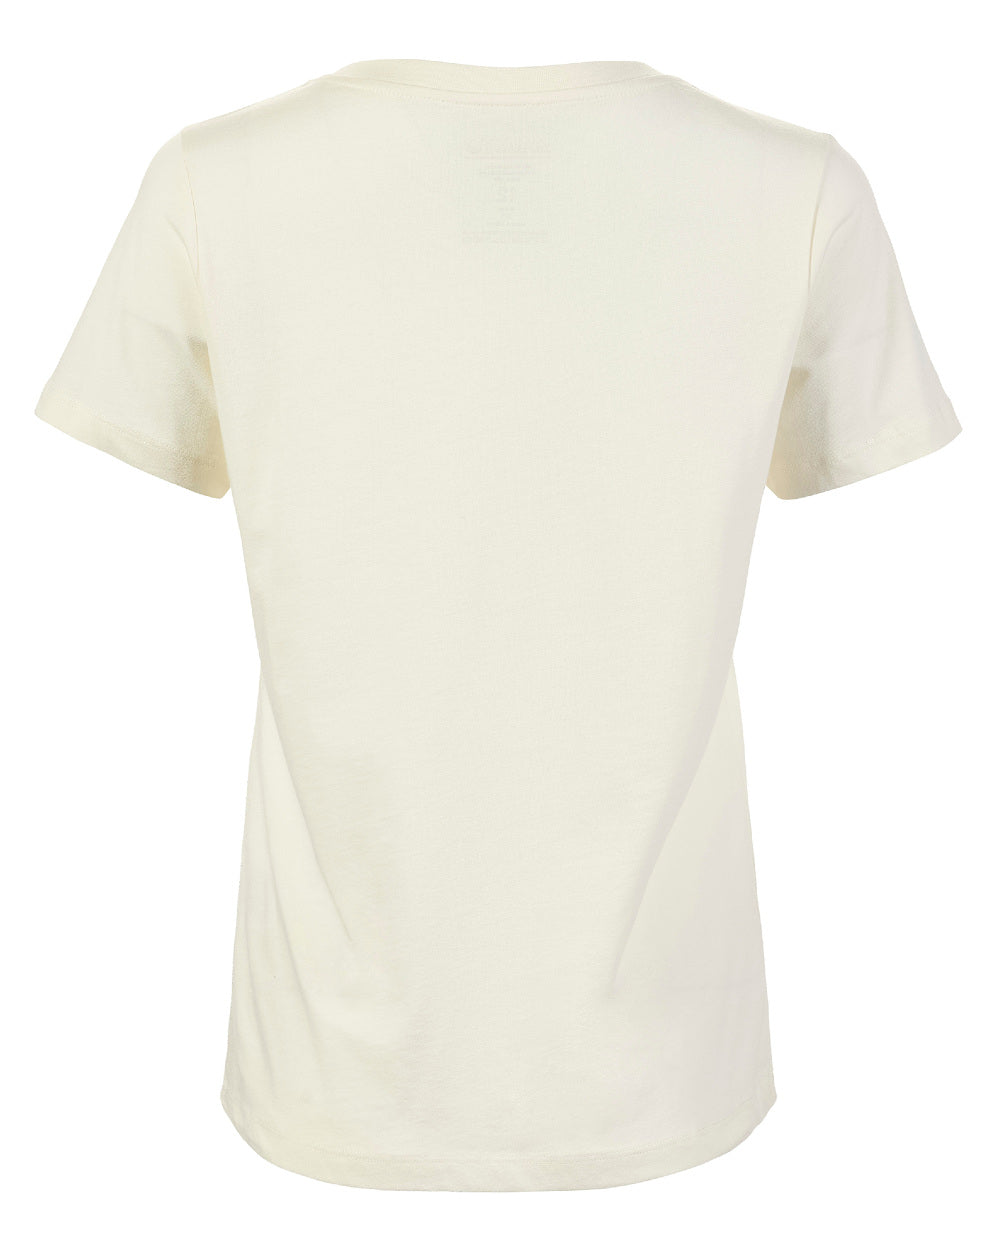 Antique Sail White Coloured Musto Womens Classic Short Sleeve T-Shirt On A White Background 